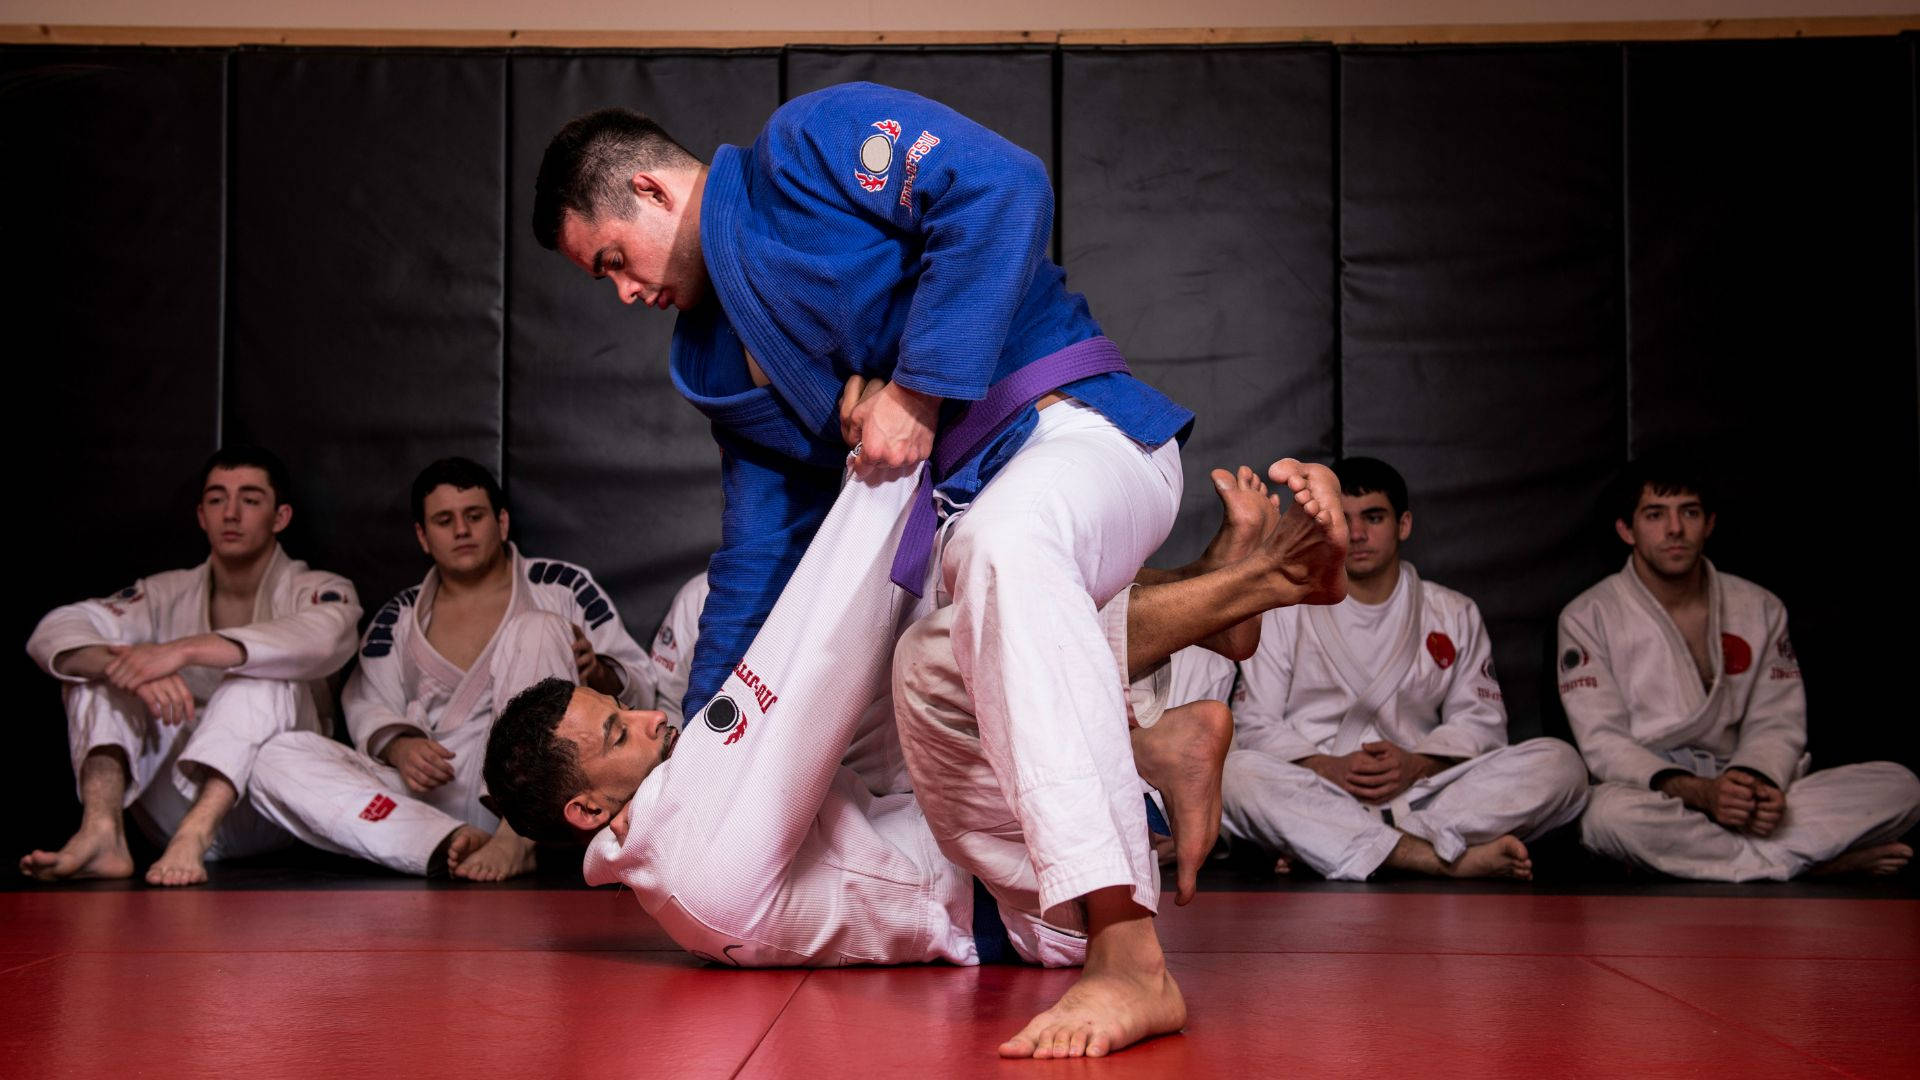 Disciplined And Focused Jiu-jitsu Fighters In Action Background